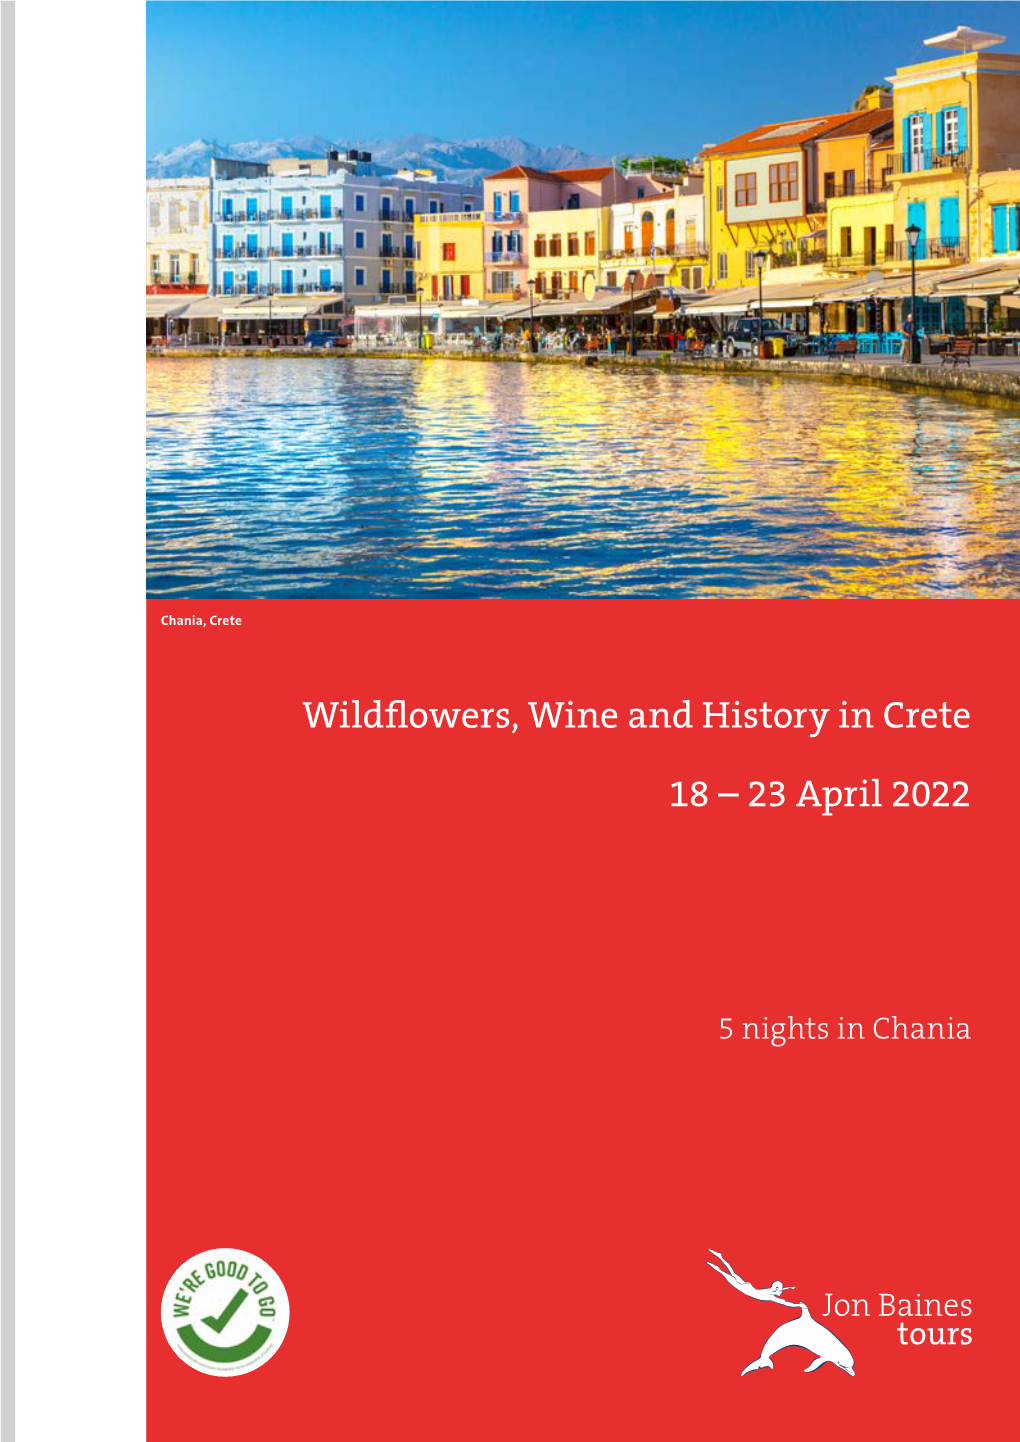 Wildflowers, Wine and History in Crete 18 – 23 April 2022